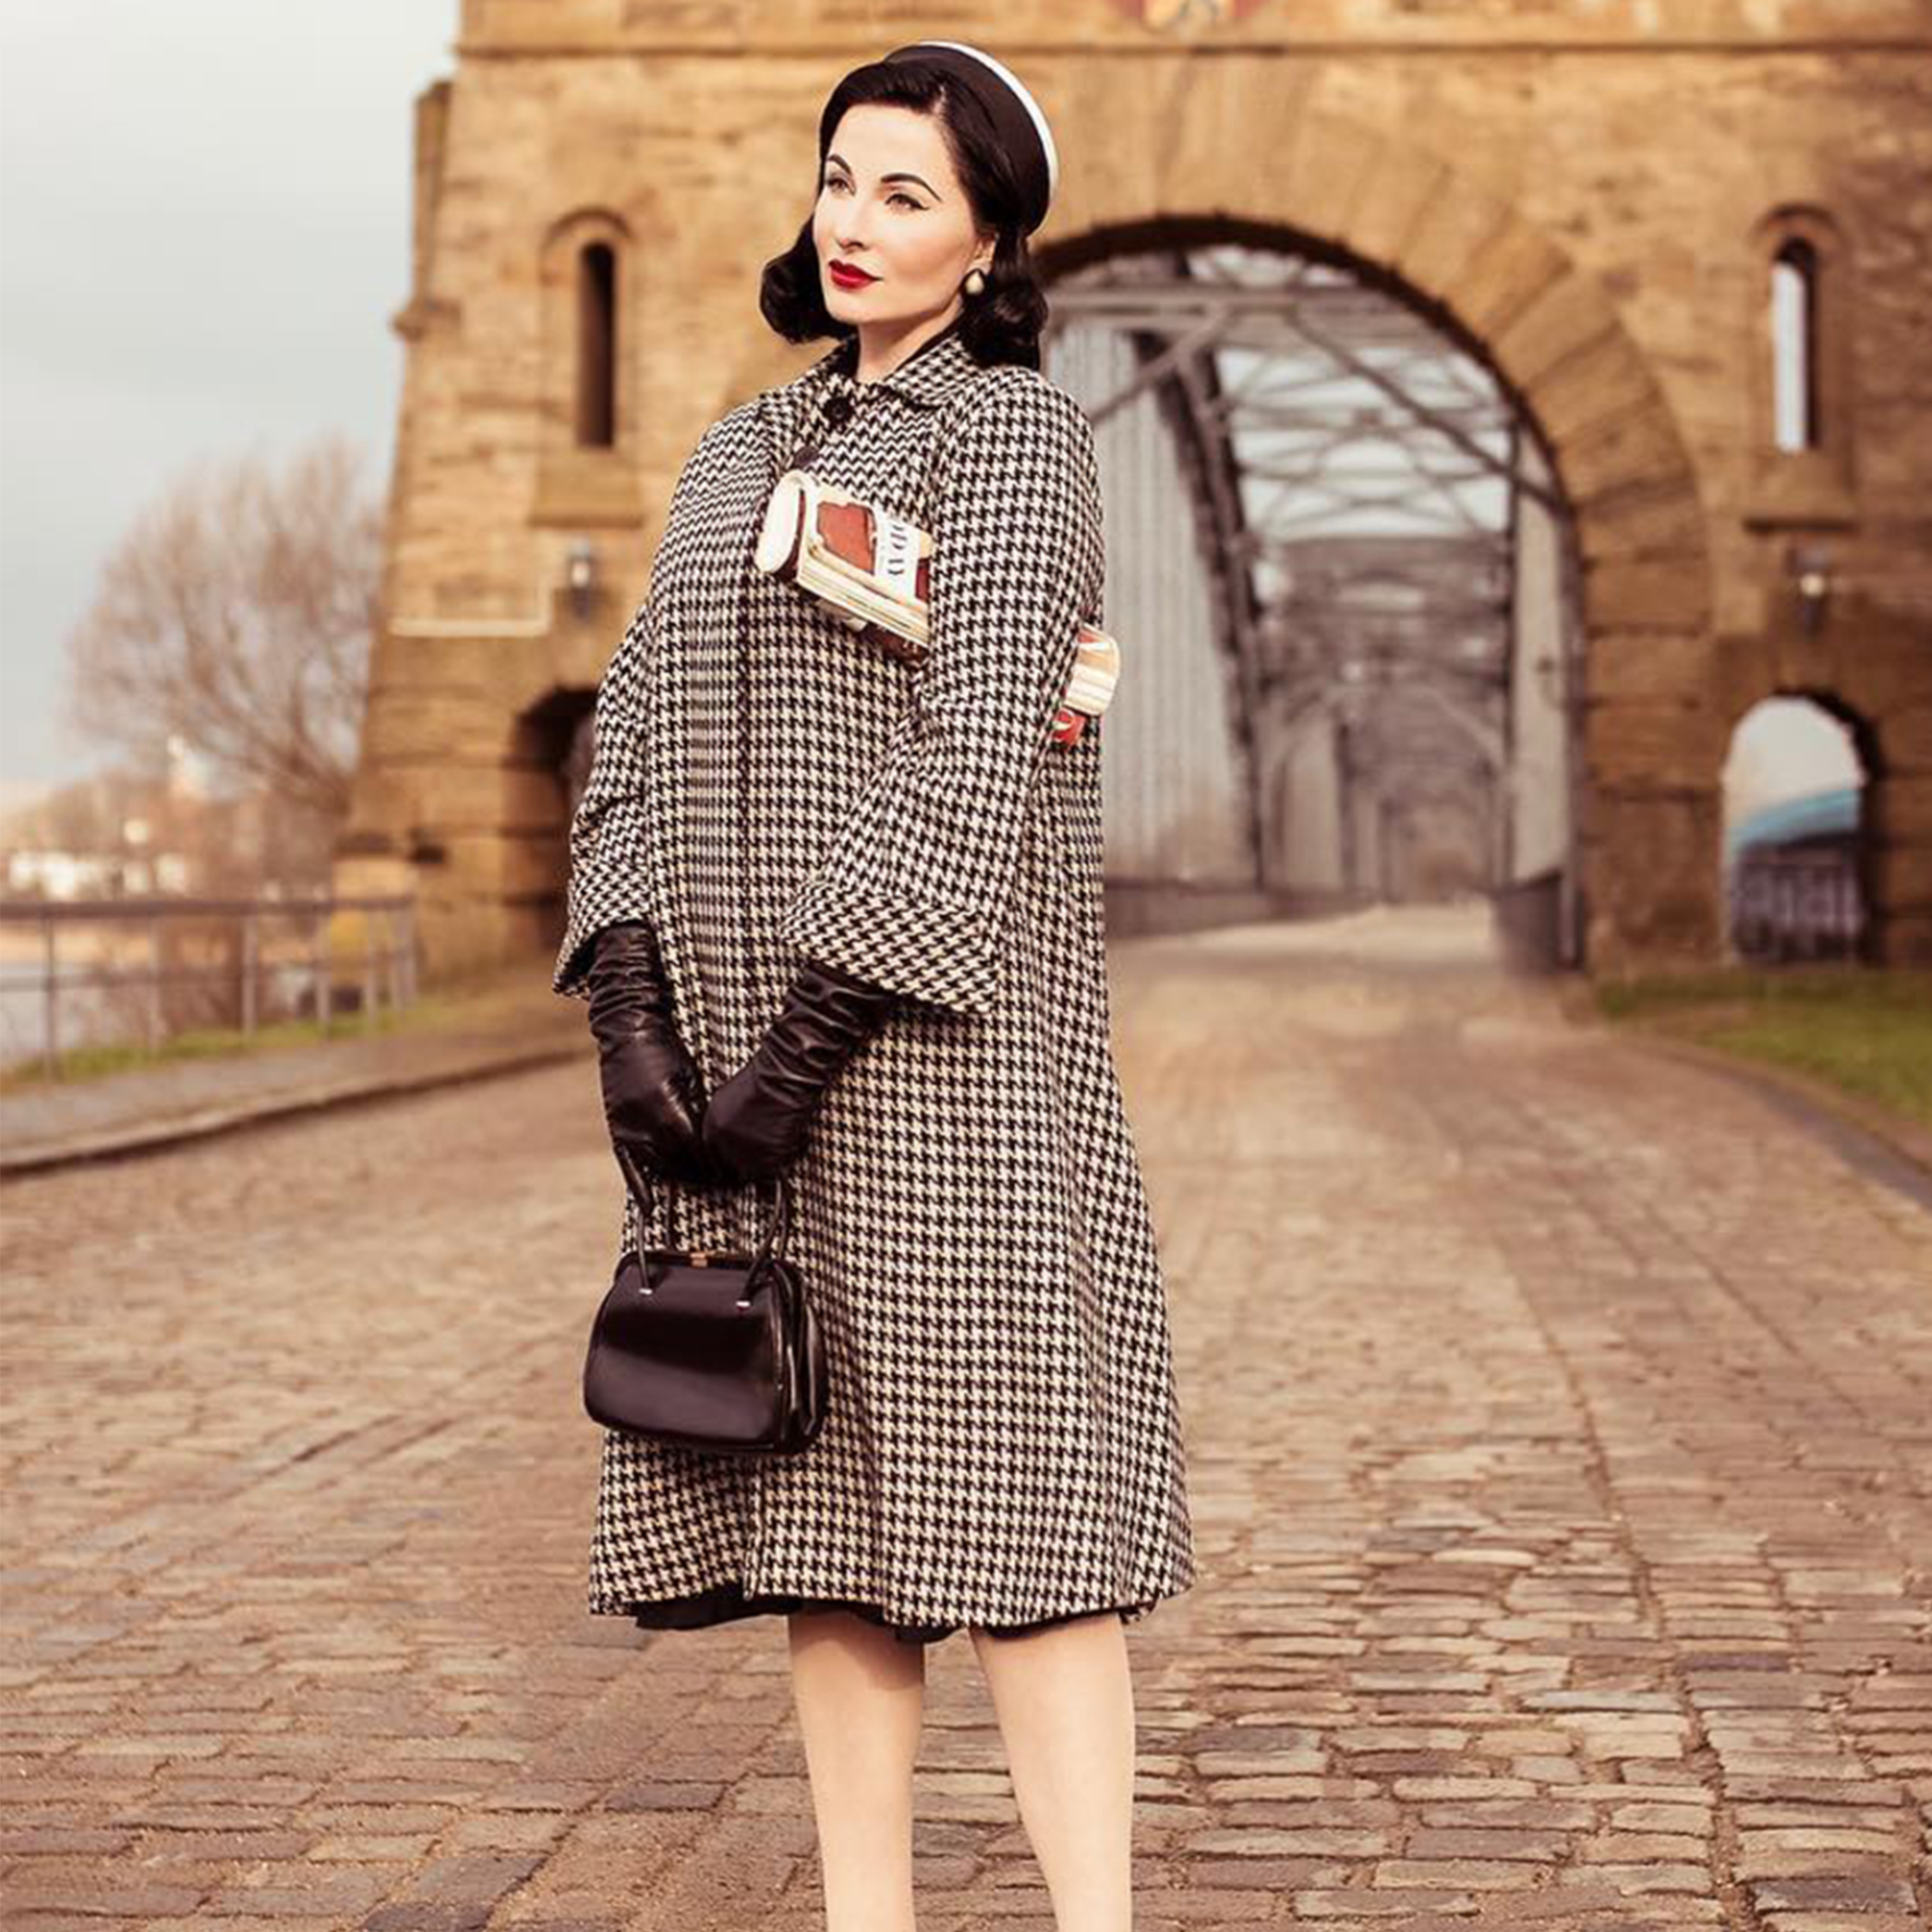 Model wears 1940s style 43 inch long swing jacket. The jacket is in black and white houndstooth print, has three buttons at the top front, small shoulder pads, and is lined in satin. Model has paired with a black bag and gloves, and has styled 1940s makeup and hair. 